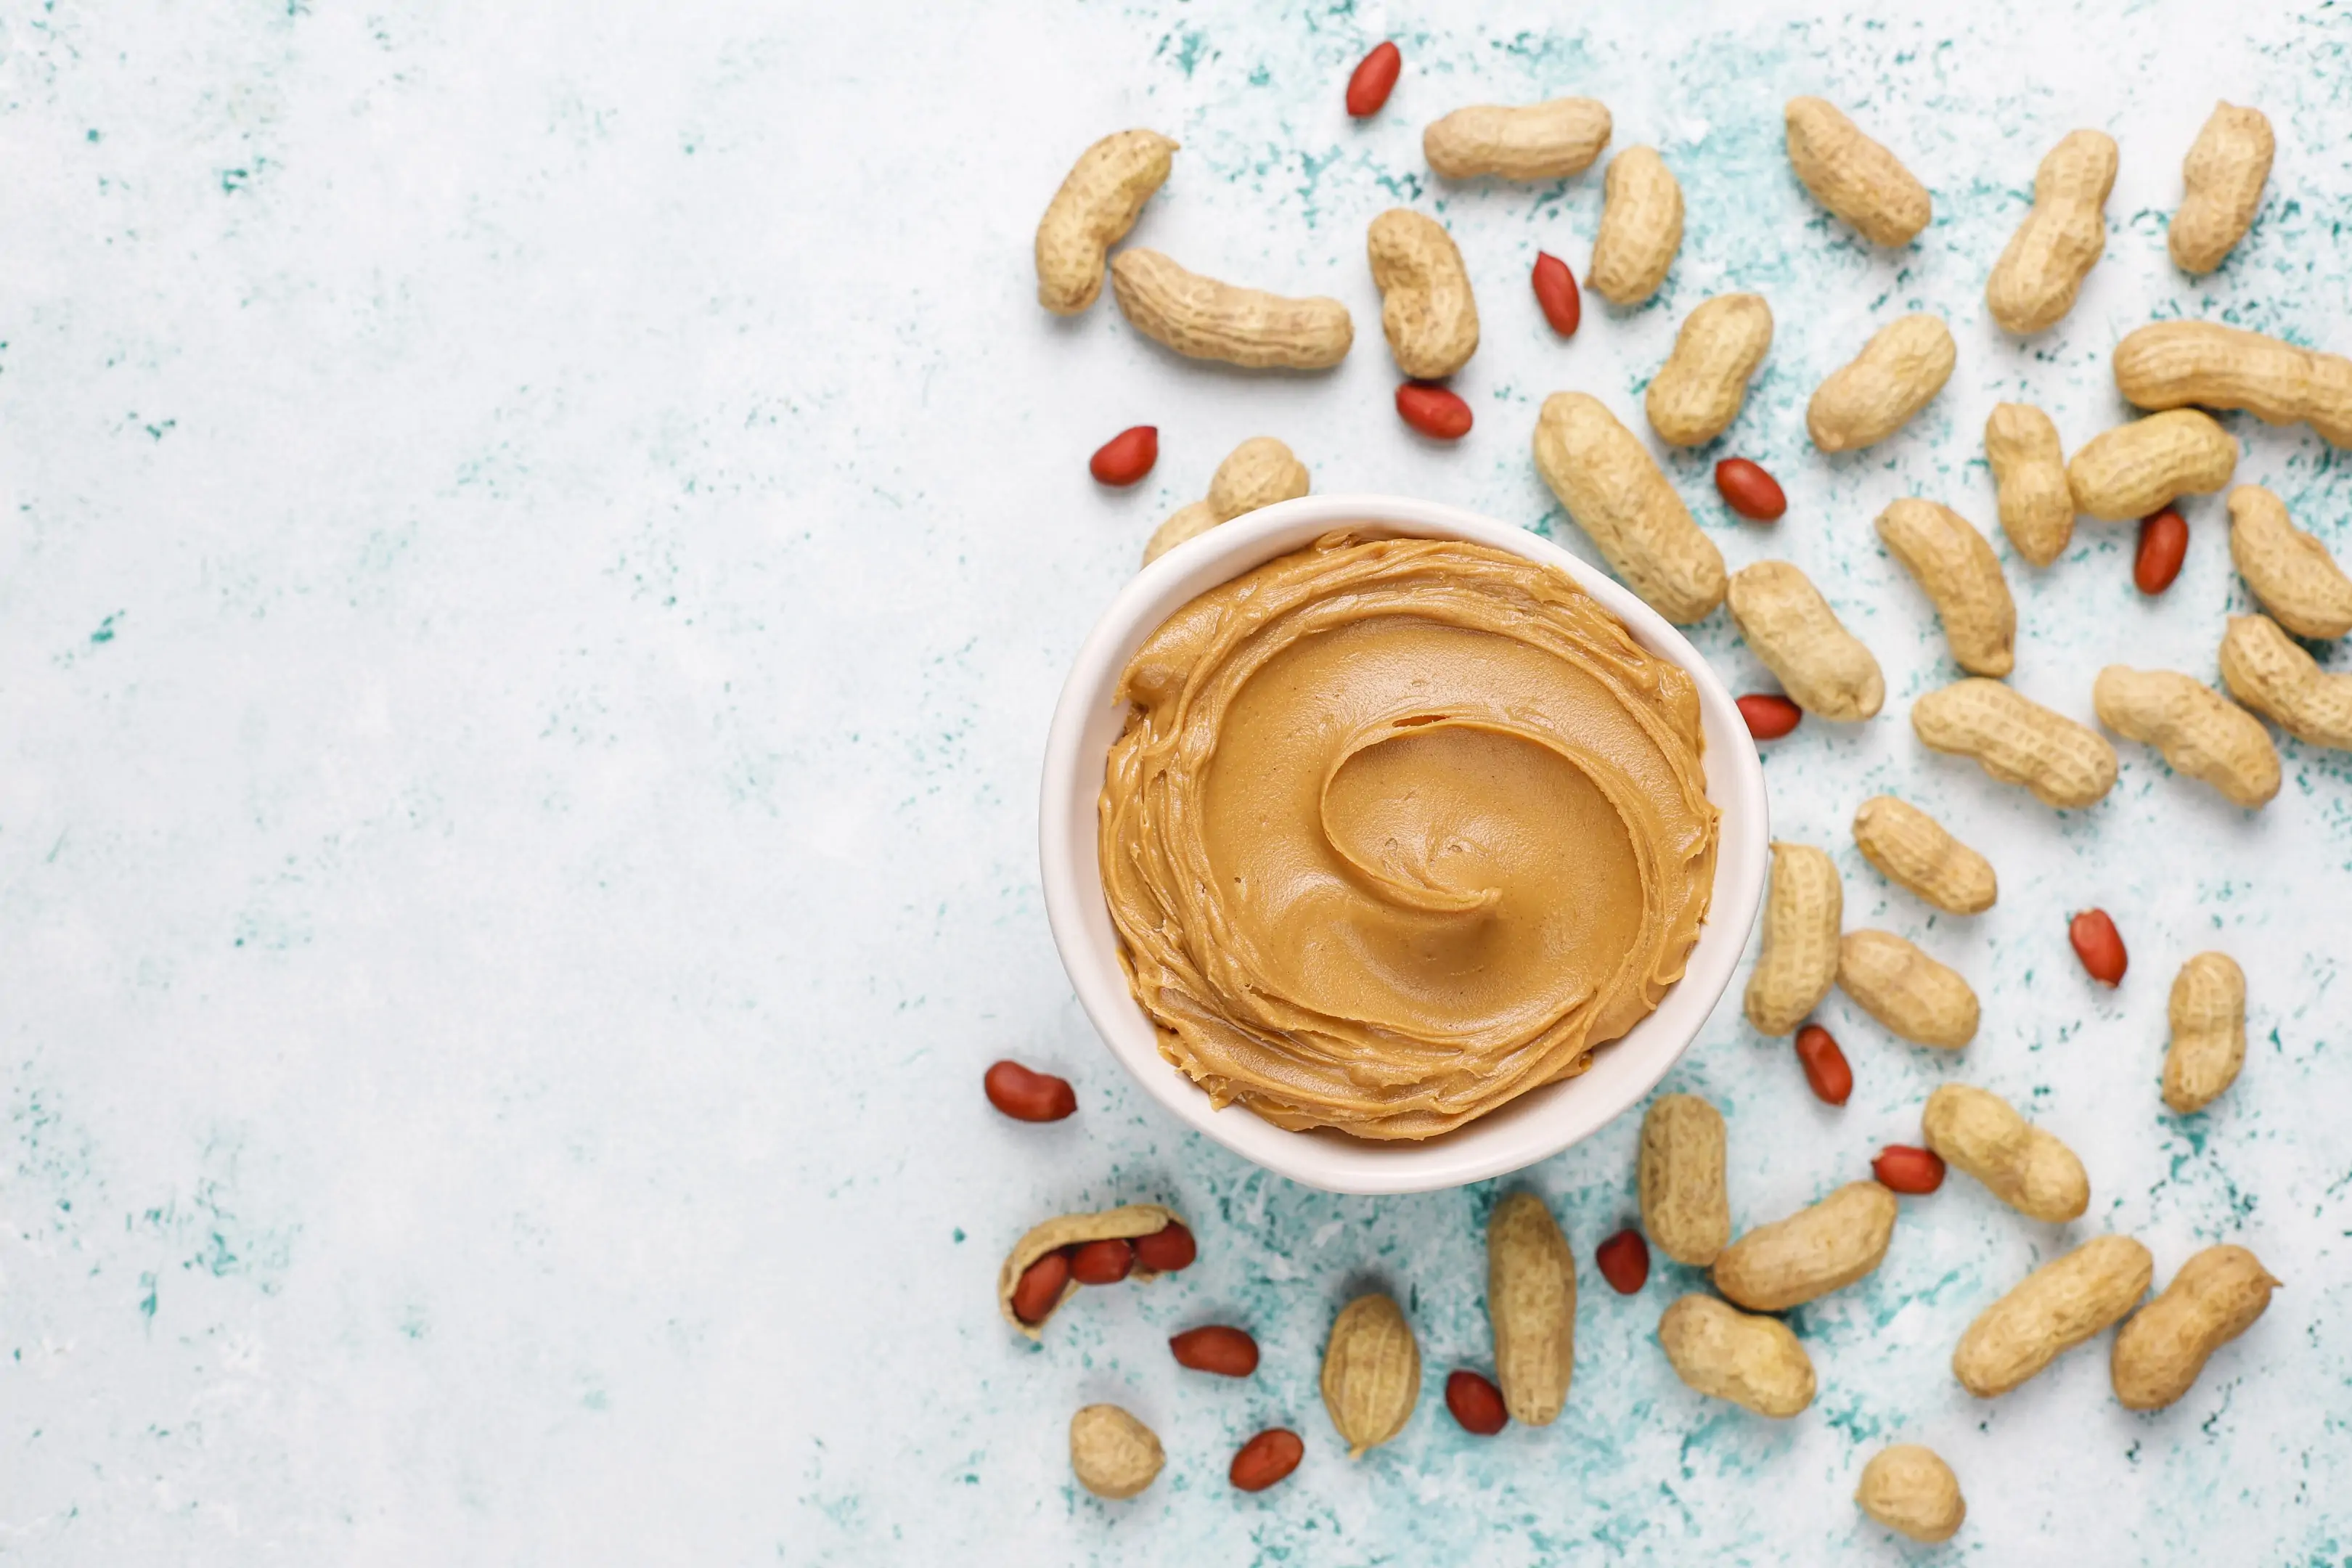 Homemade peanut butter with peanuts on a grey concrete table